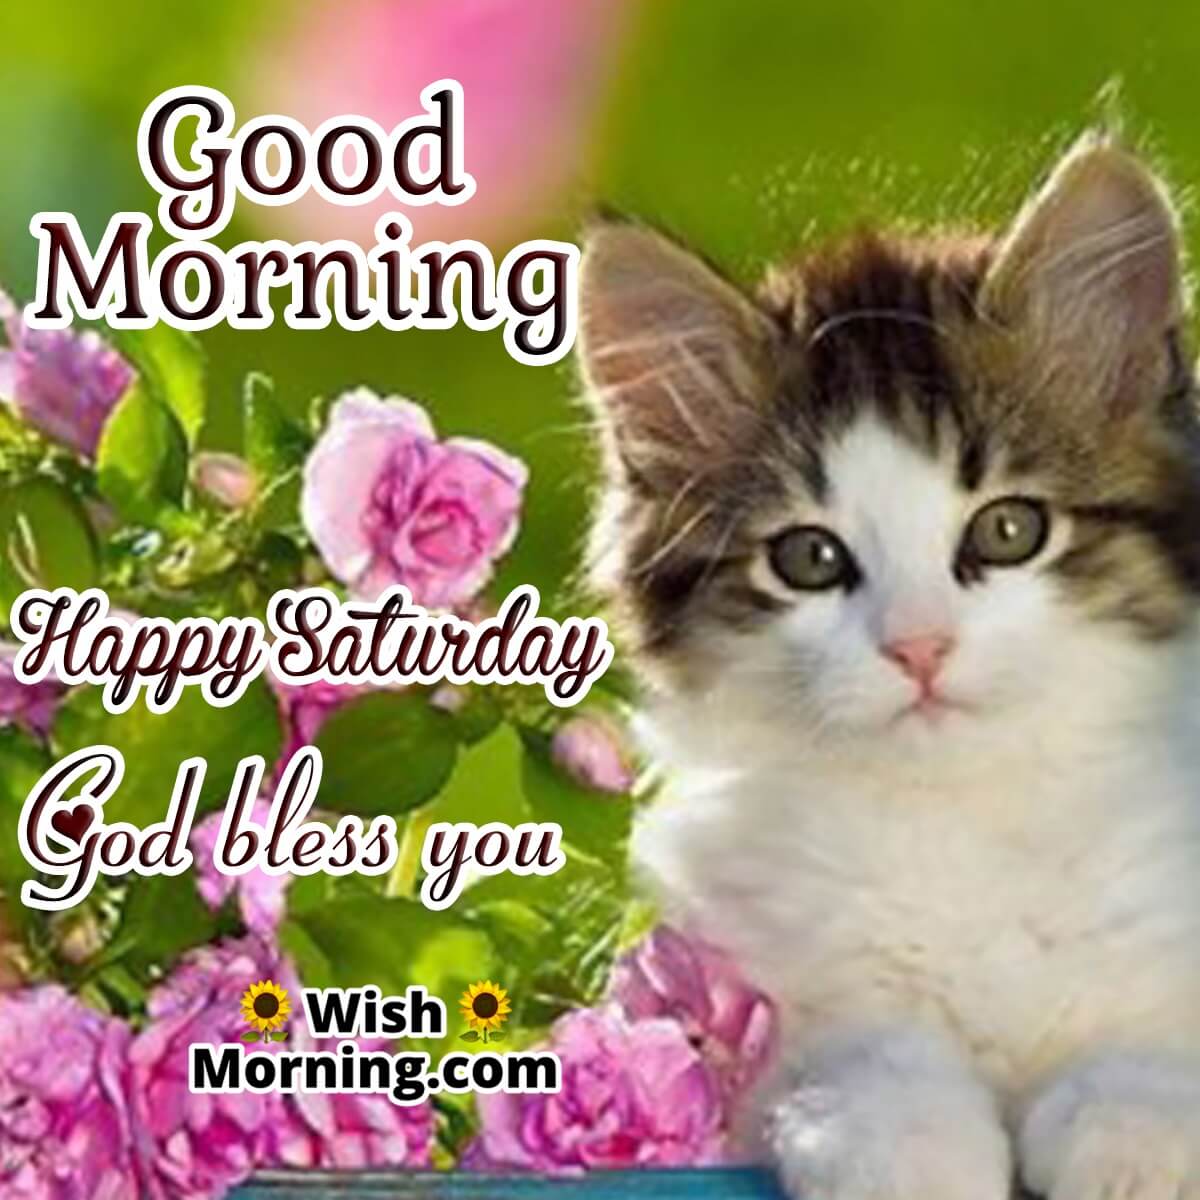 Good Morning Happy Saturday God Bless You